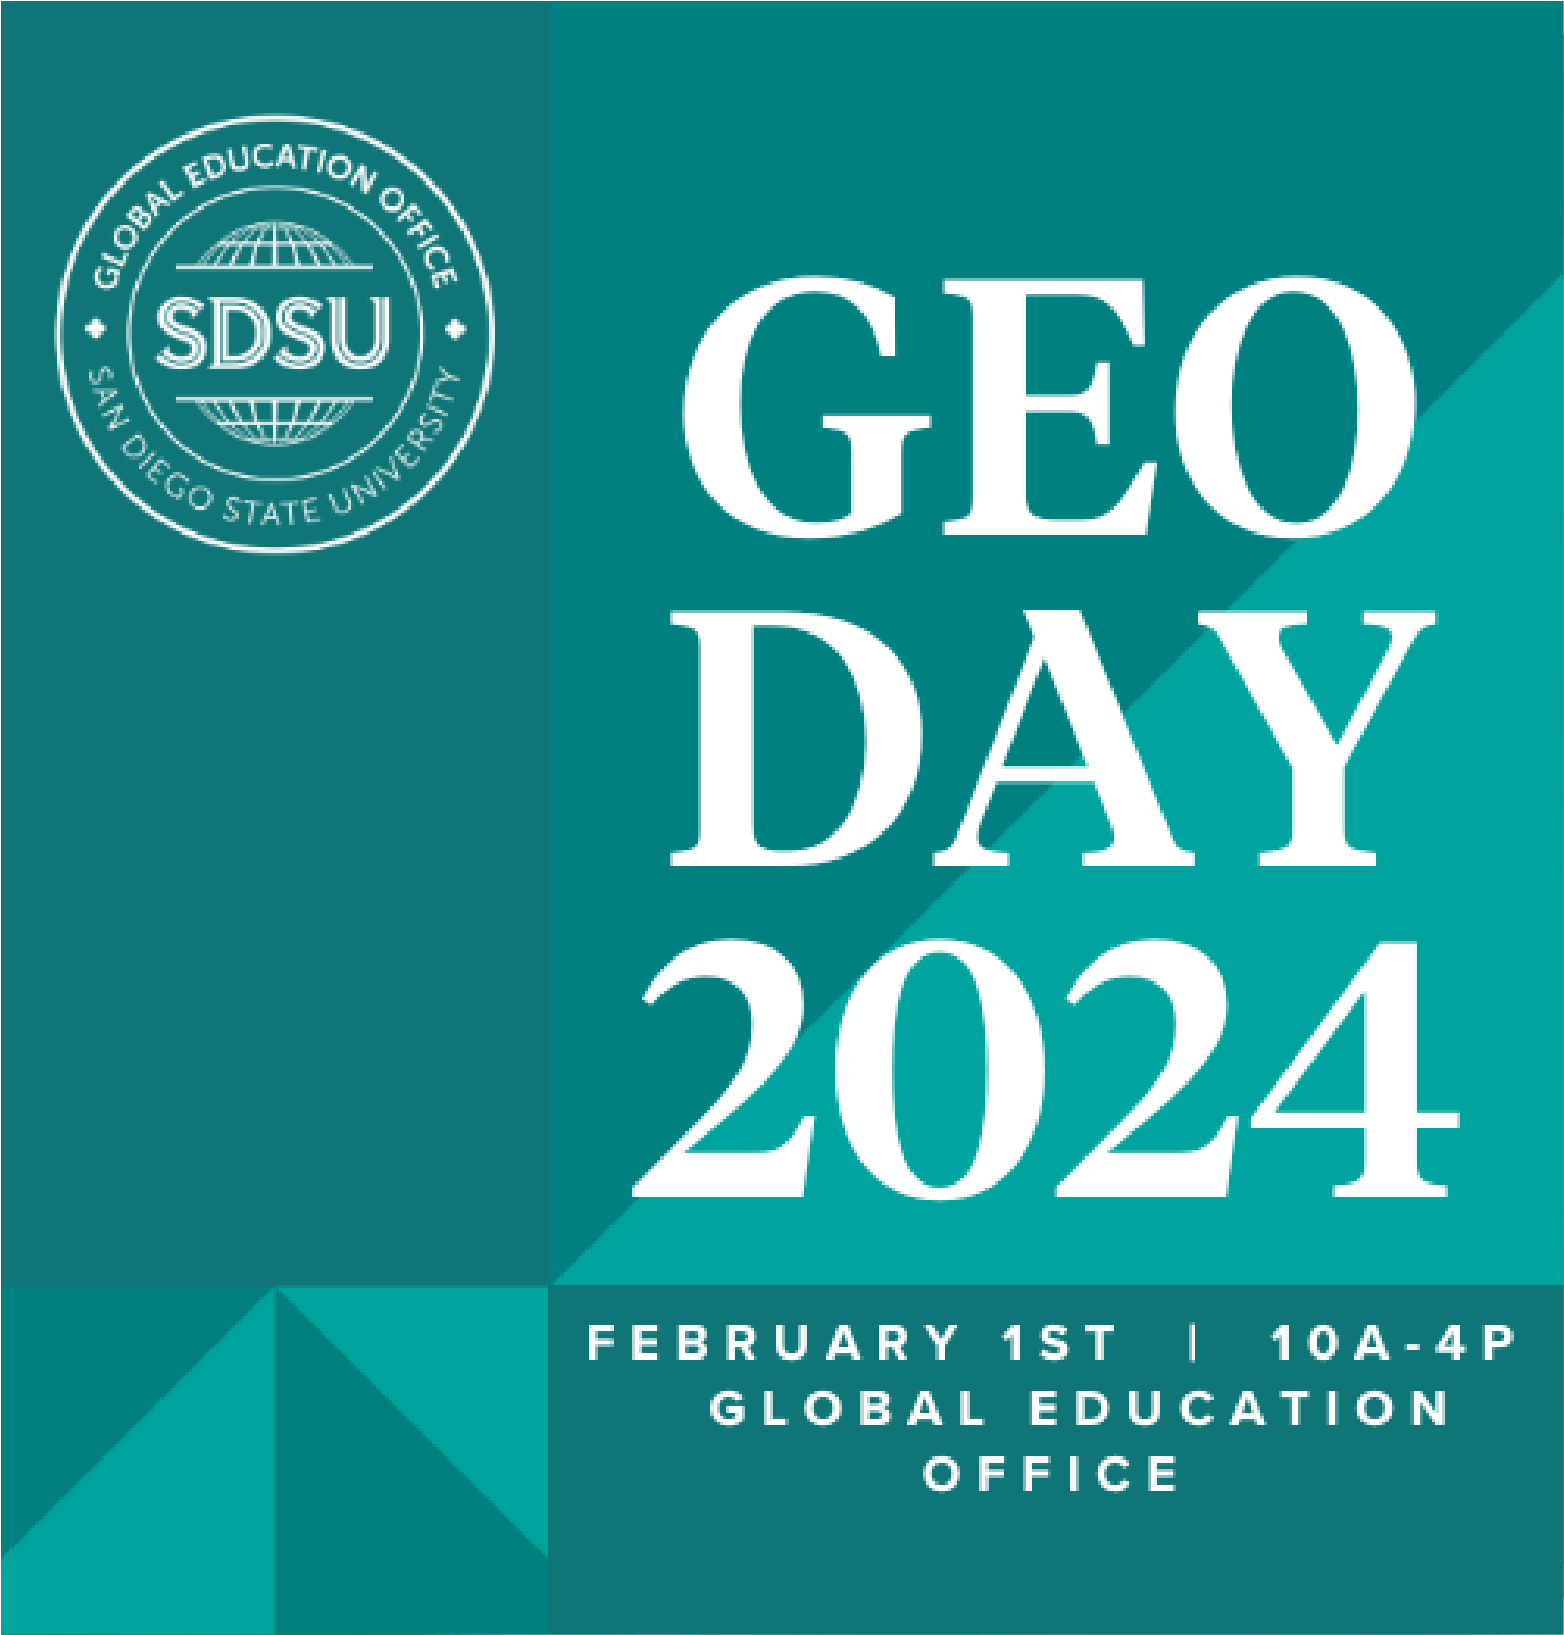 teal background with white uppercase text that says "GEO DAY 2024" and event information below it and Global Education Office logo in white on the upper left corner